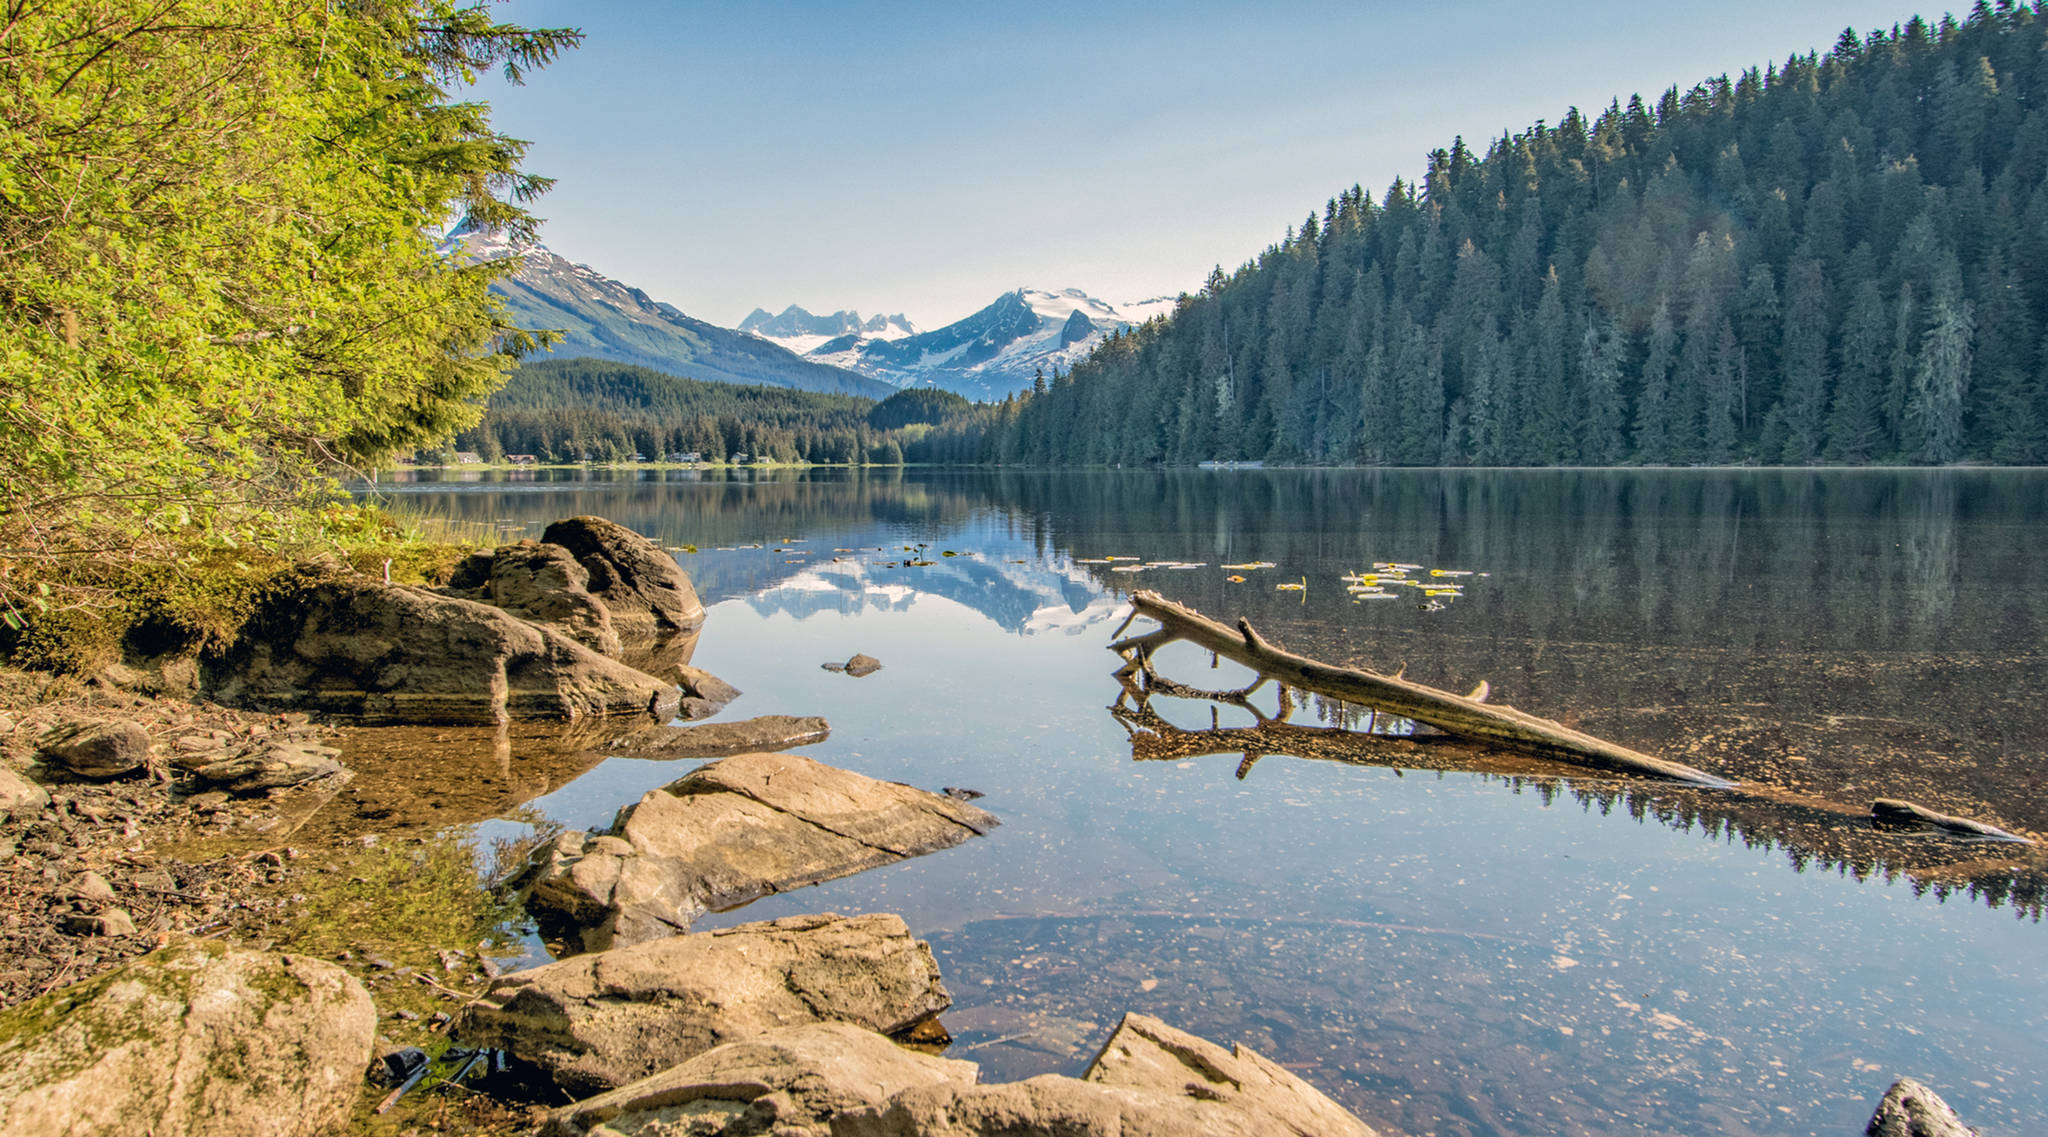 The mountains and trees reflect in Auke Lake on May 25, 2019. (Courtesy Photo | Kerry Howard)